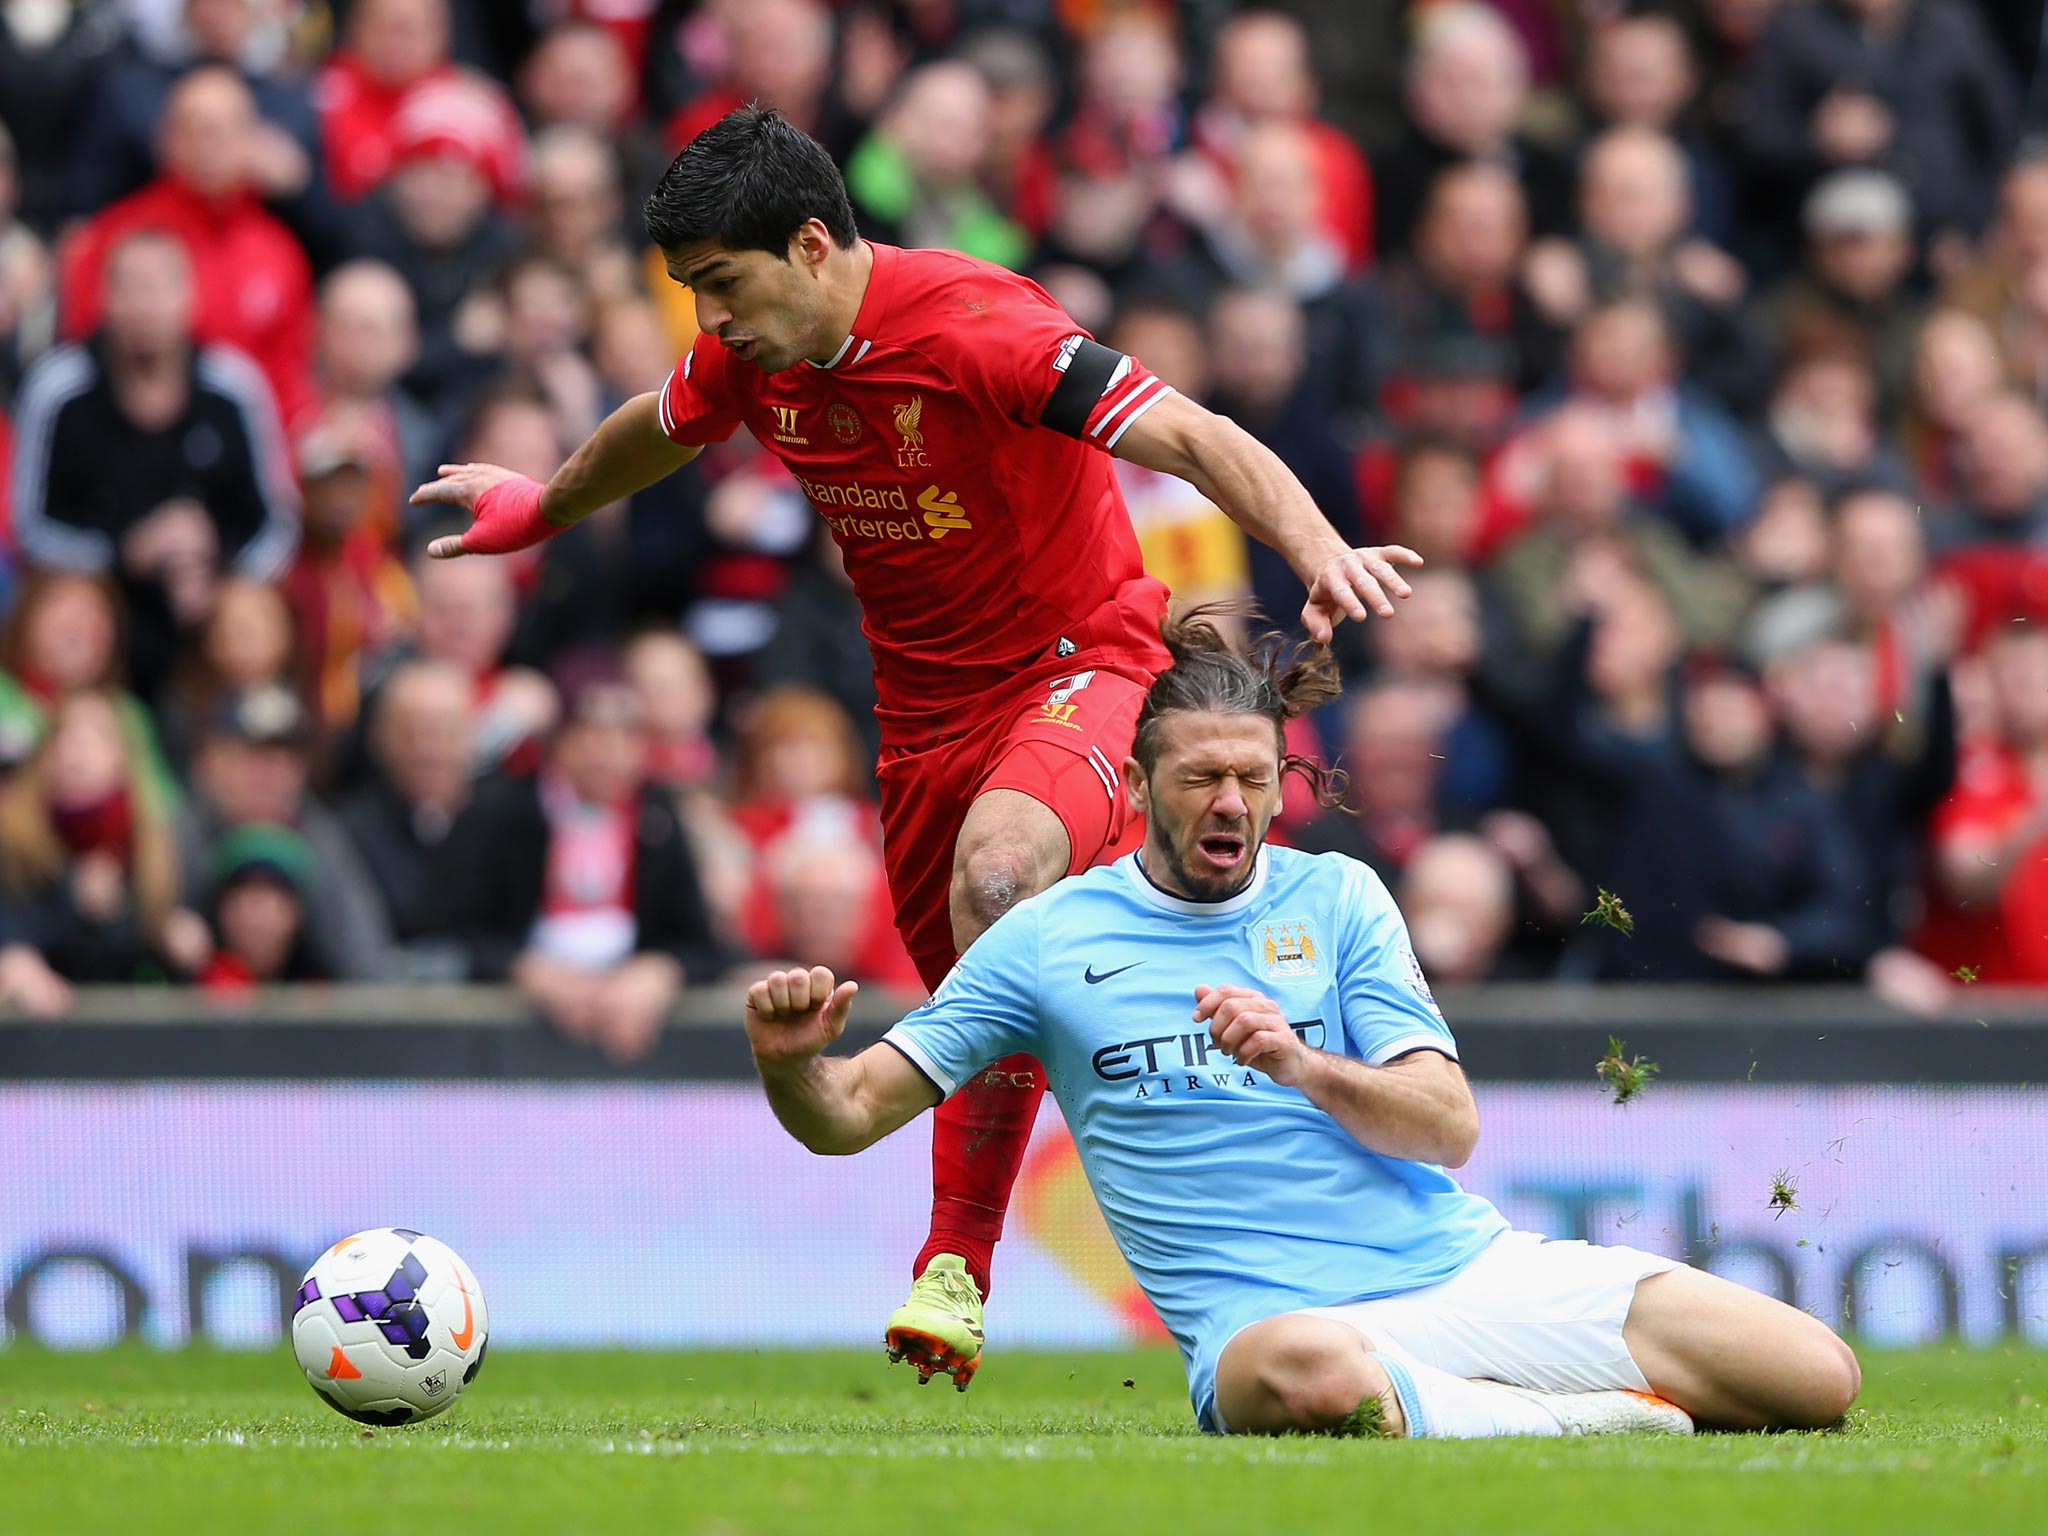 Martin Demichelis has vowed to keep fighting in the chase for the Premier League title